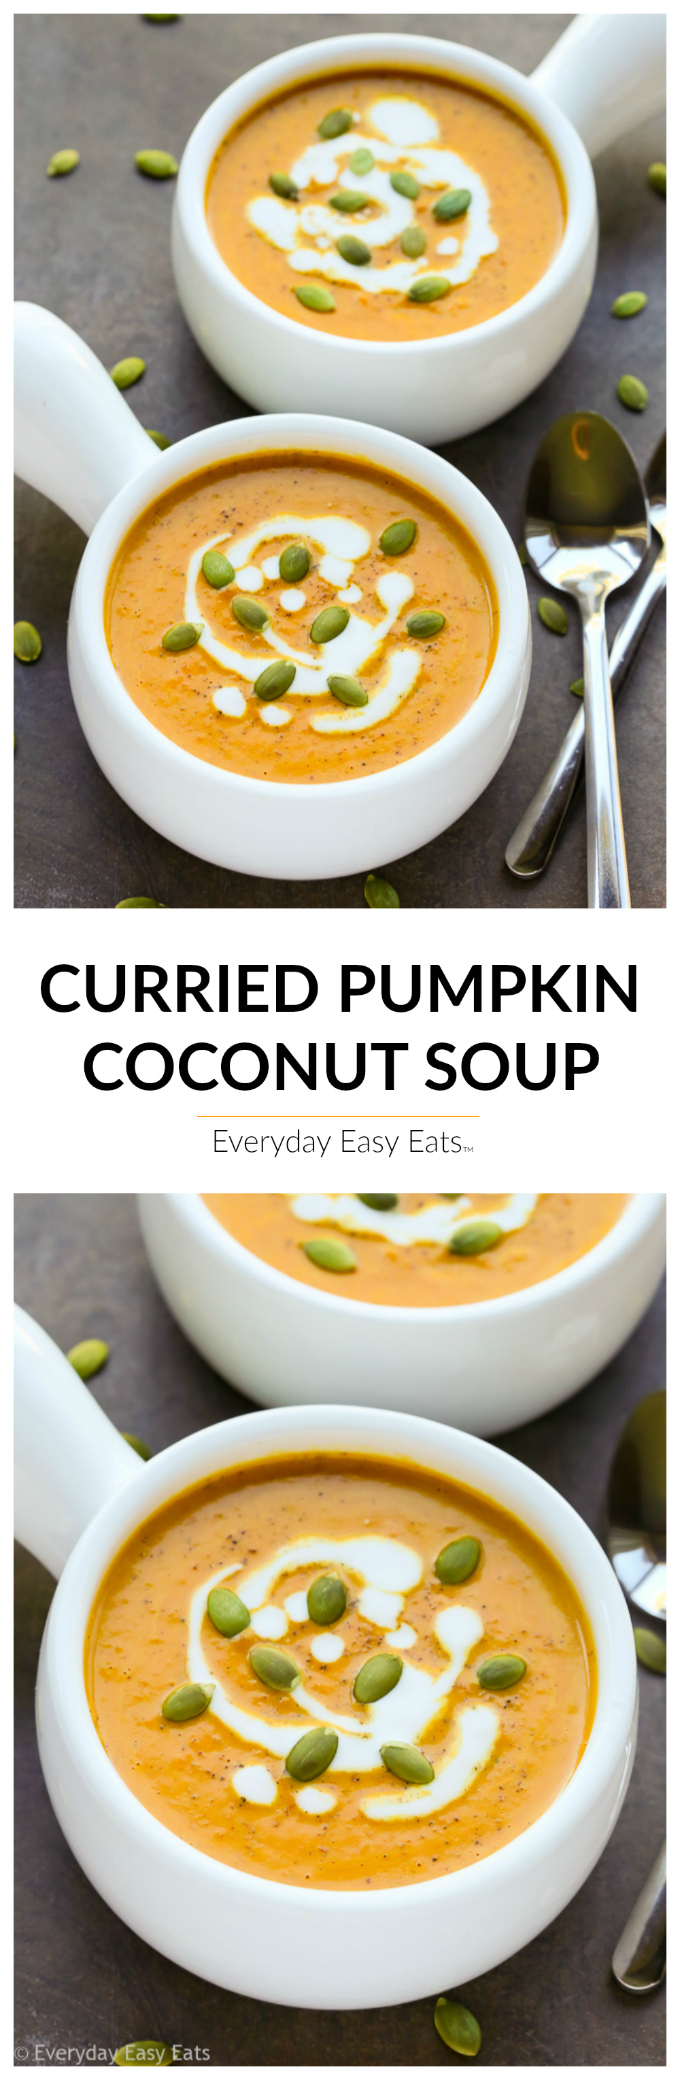 Curried Pumpkin Coconut Soup - Gluten-free, dairy-free, vegan, paleo and ready in 20 minutes! | EverydayEasyEats.com